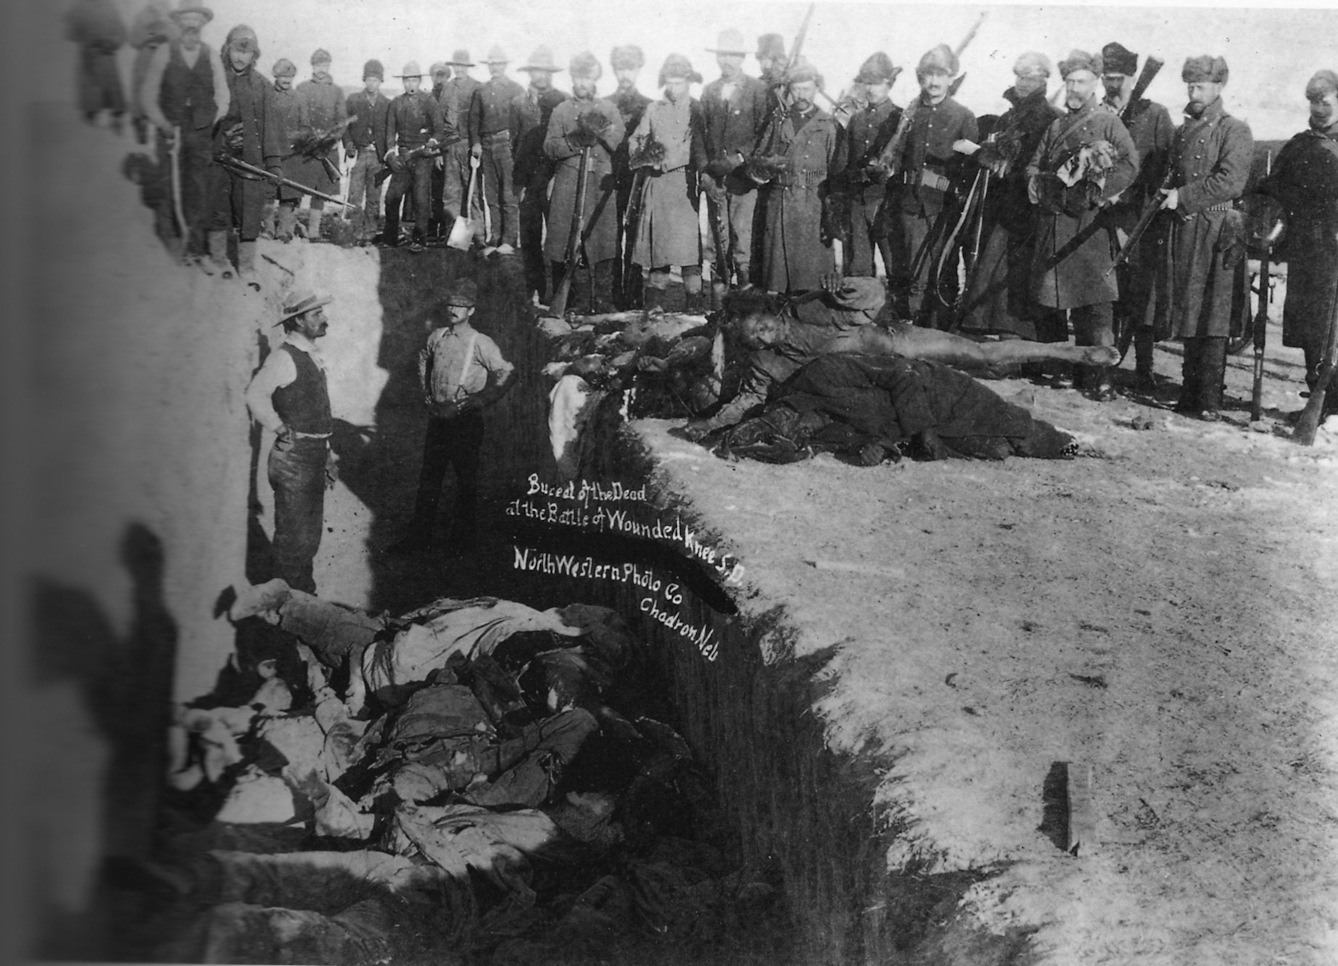 Burial of the dead after the Wounded Knee Massacre